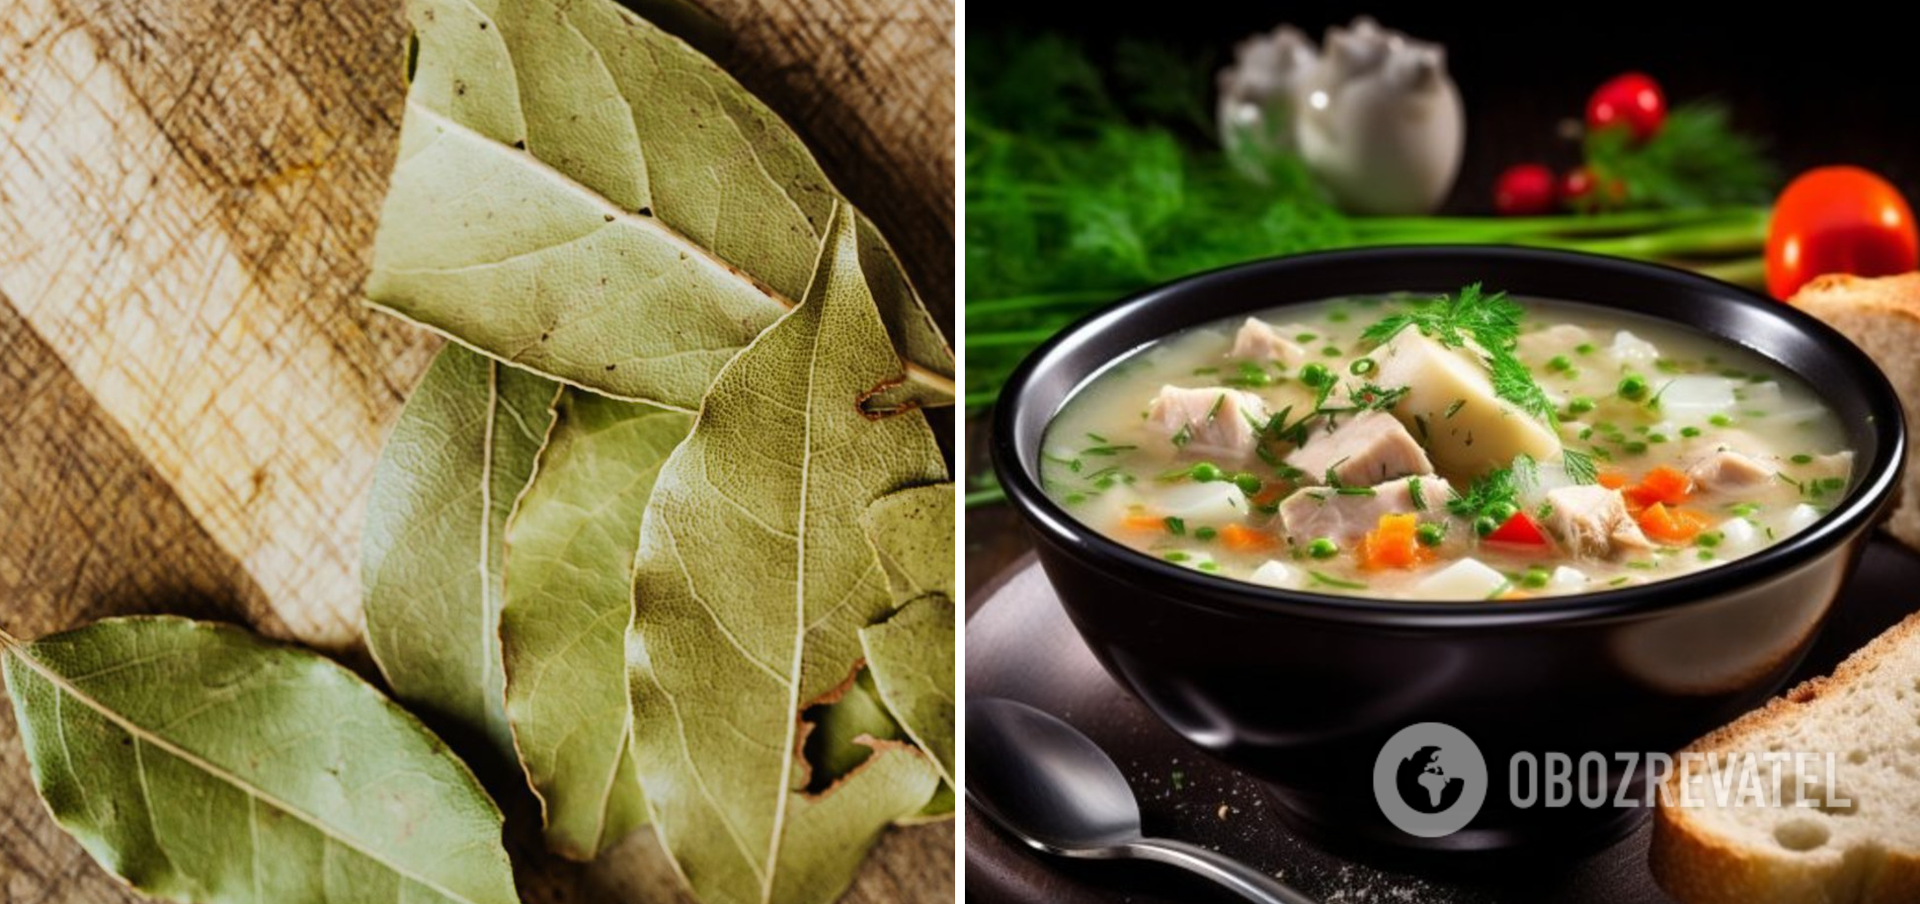 Why bay leaves can spoil soup and borscht